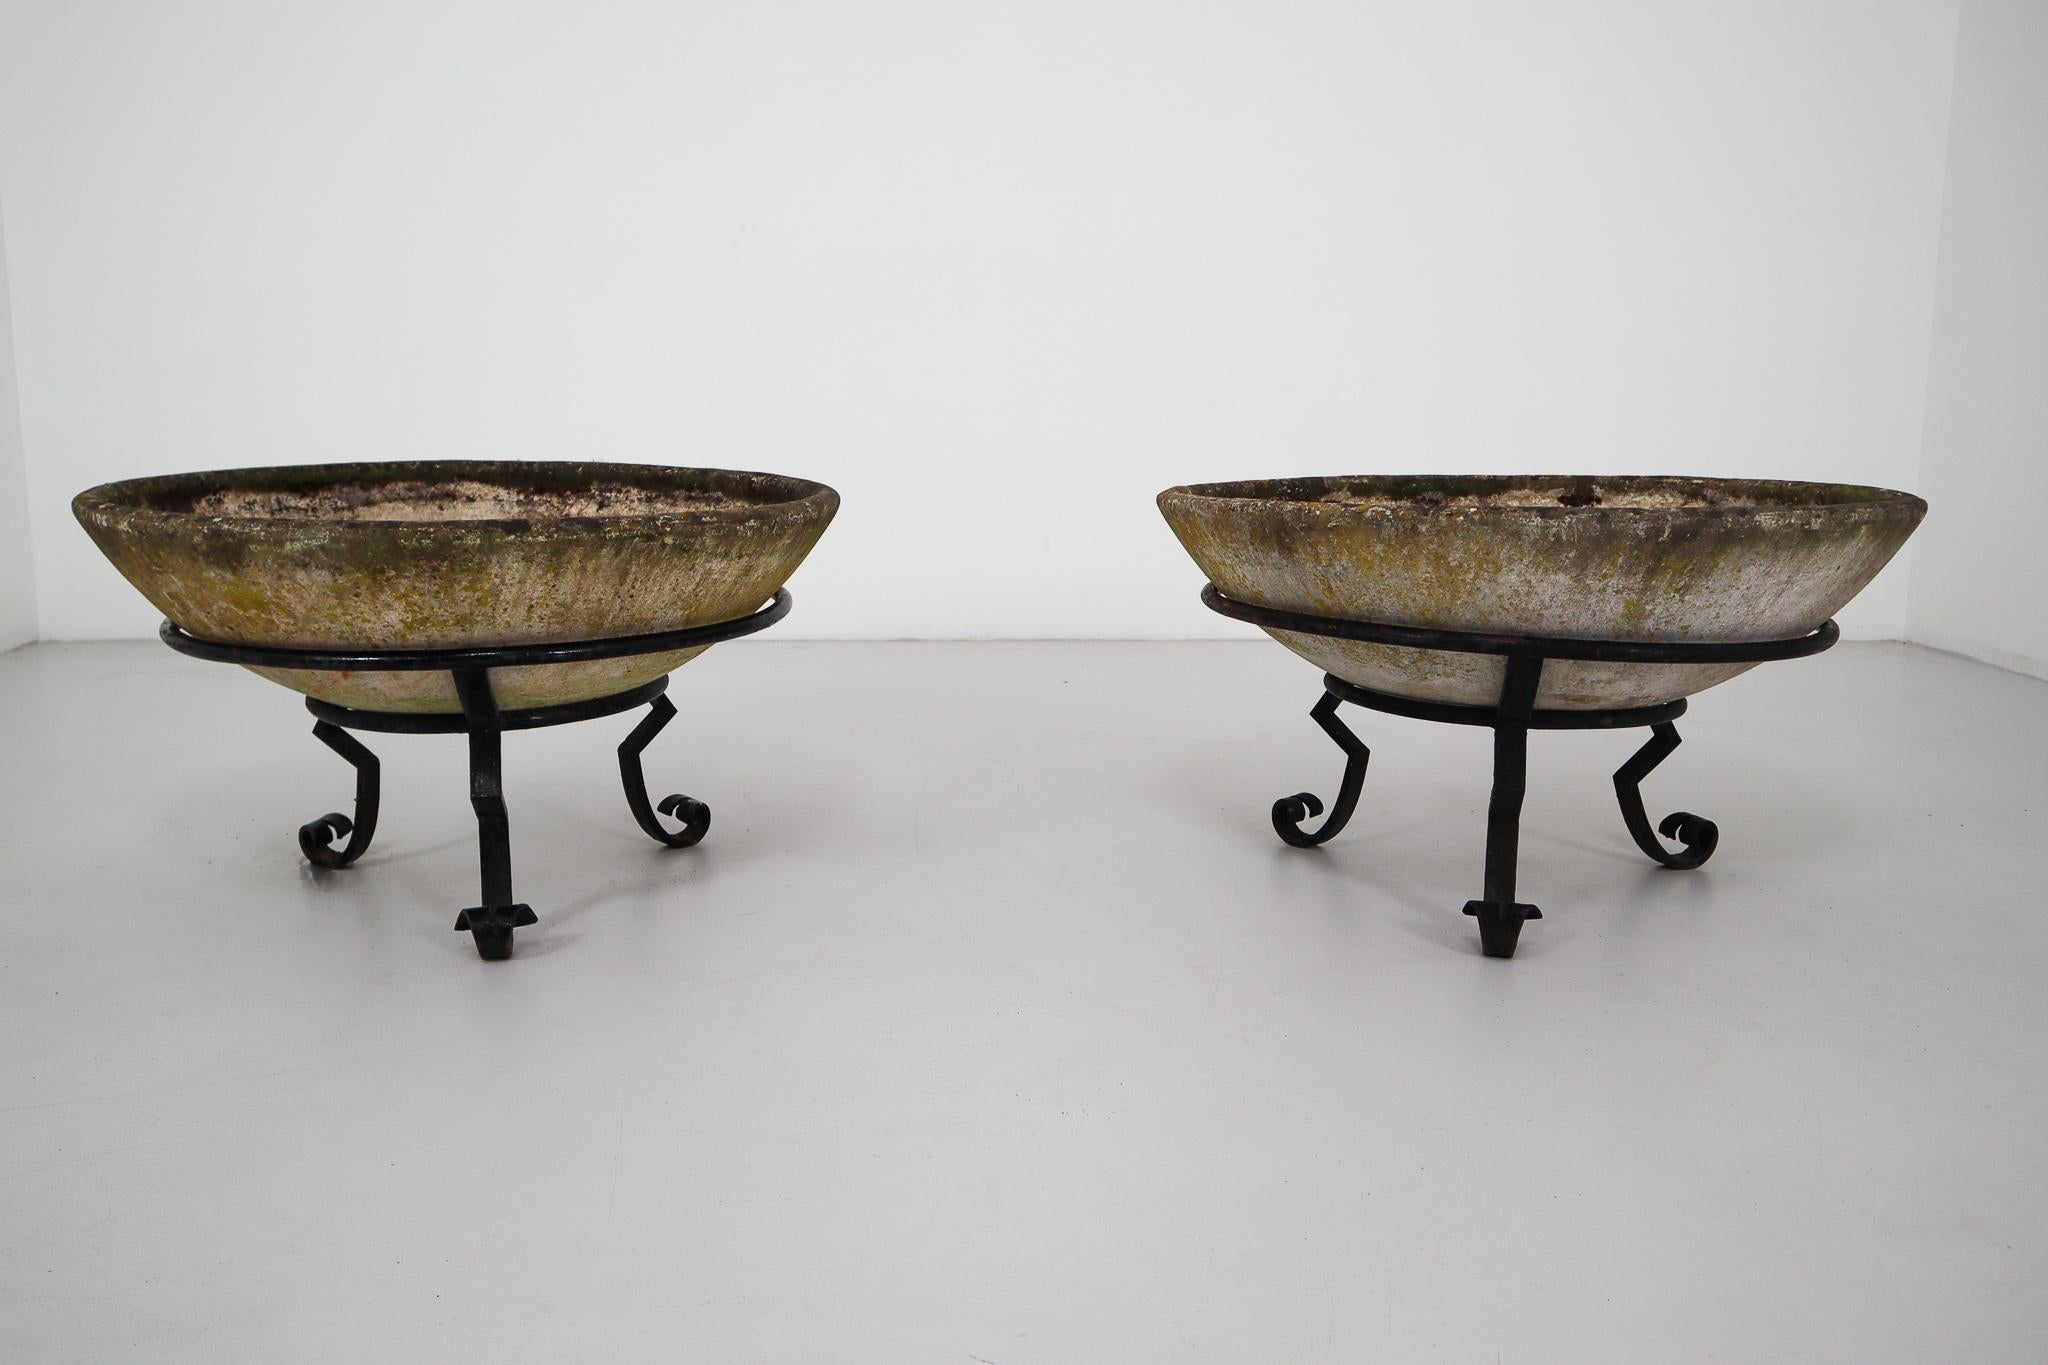 A fine pair of Mid-Century Modern large saucer planters of composition stone for an indoor or outdoor garden, garden room, or terrace, designed by the iconic Willy Guhl in the early 1960s. They have a lovely naturally-weathered surface.